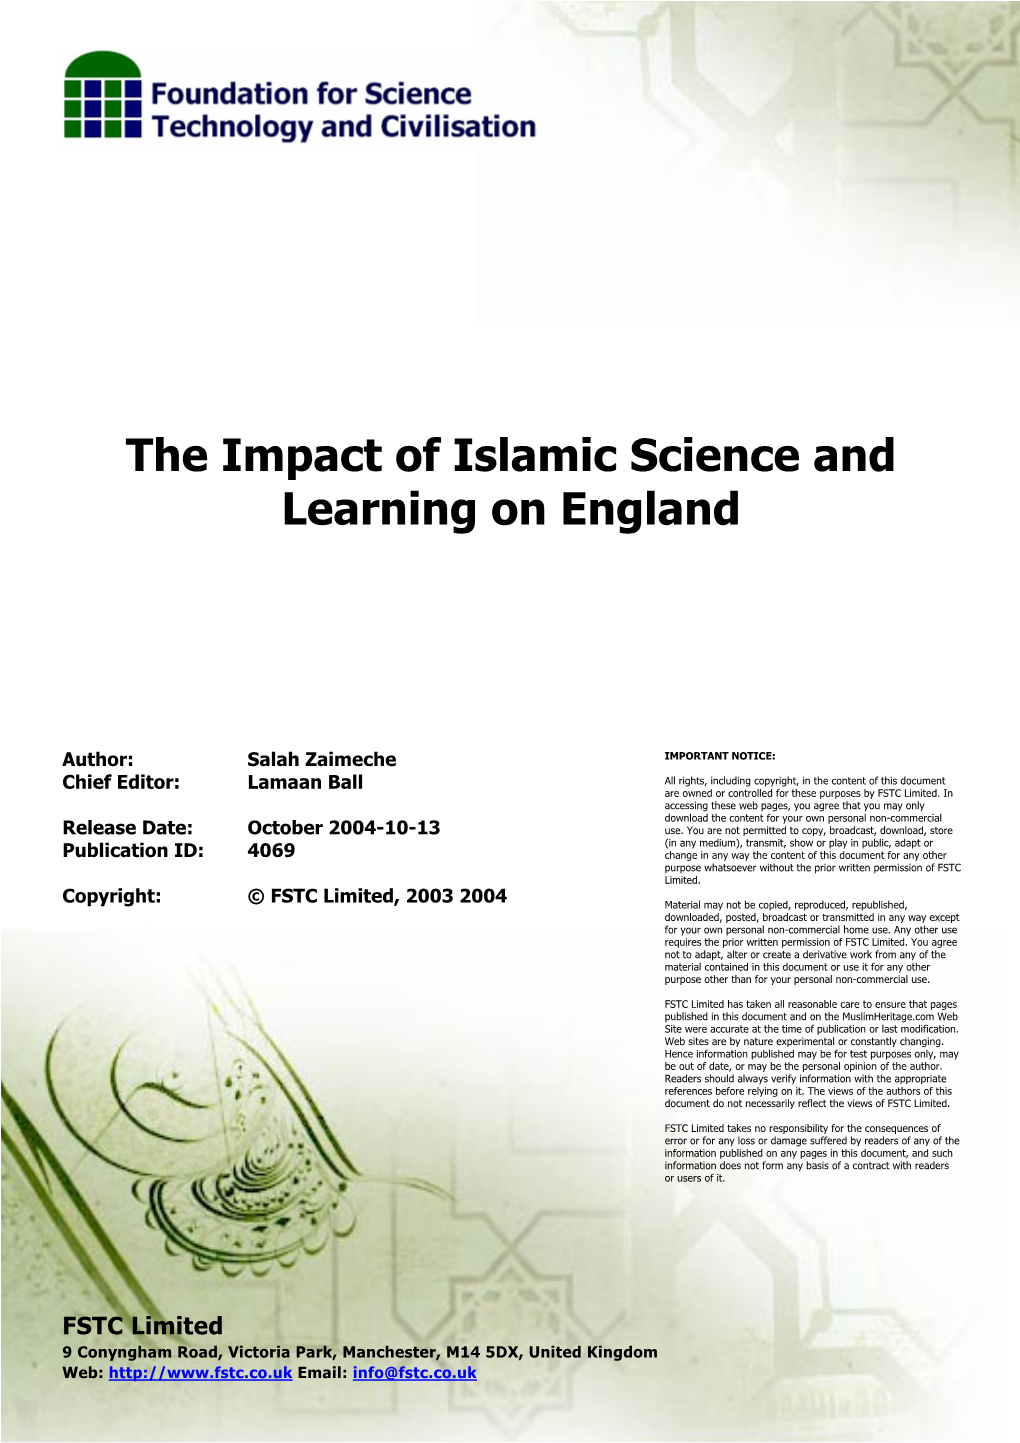 The Impact of Islamic Science and Learning on England October 2004